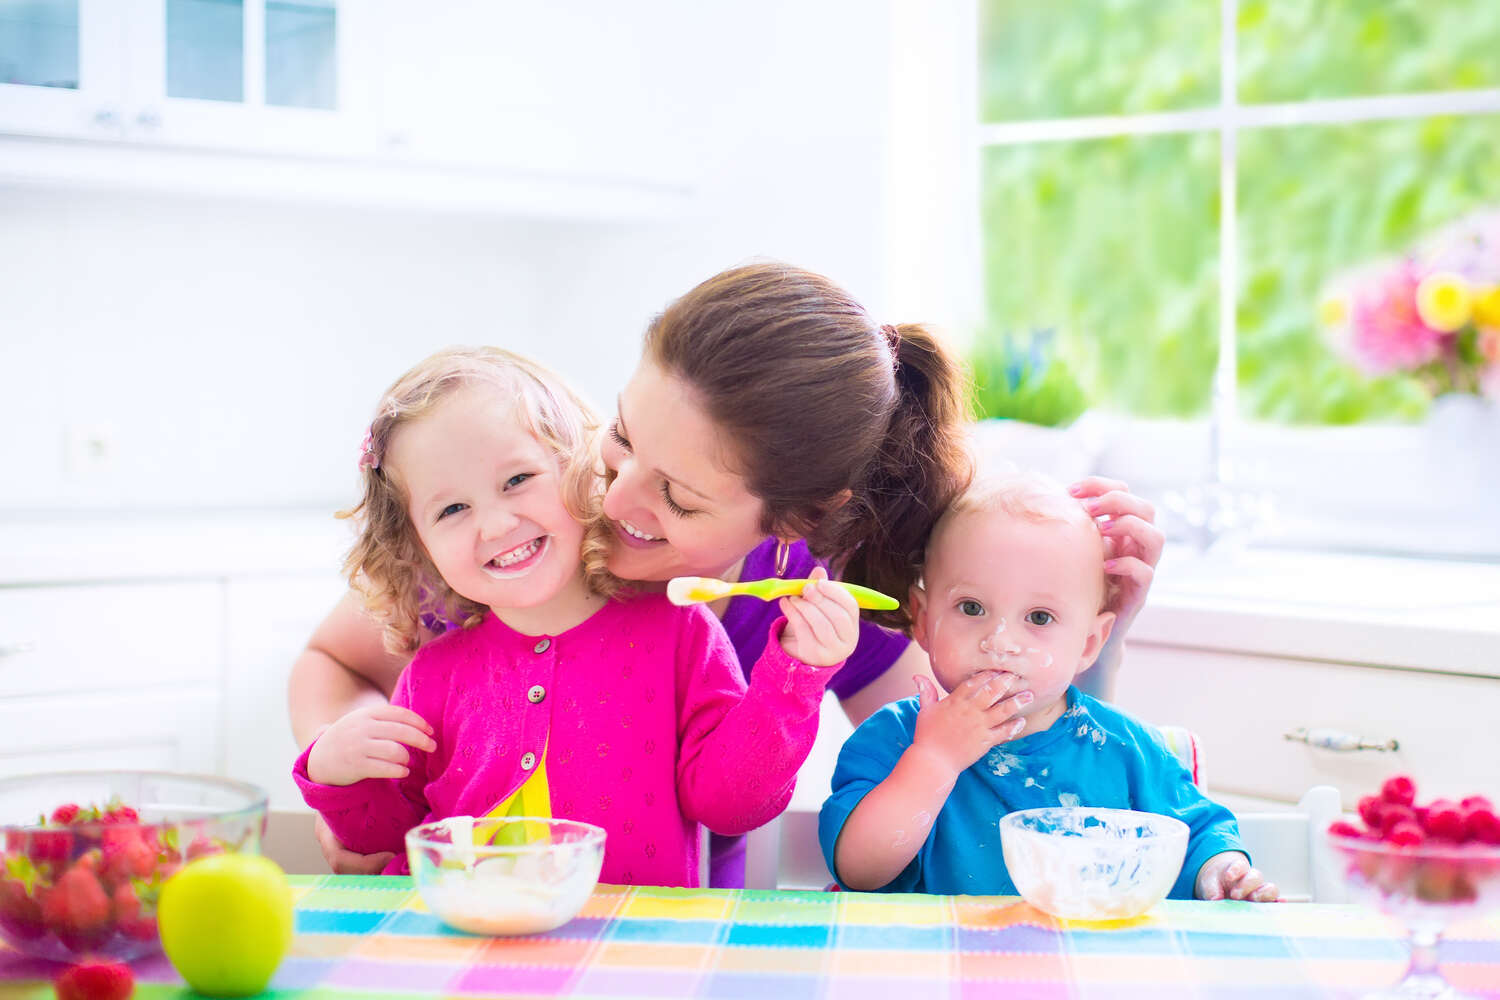 Make meal time fun for your toddler